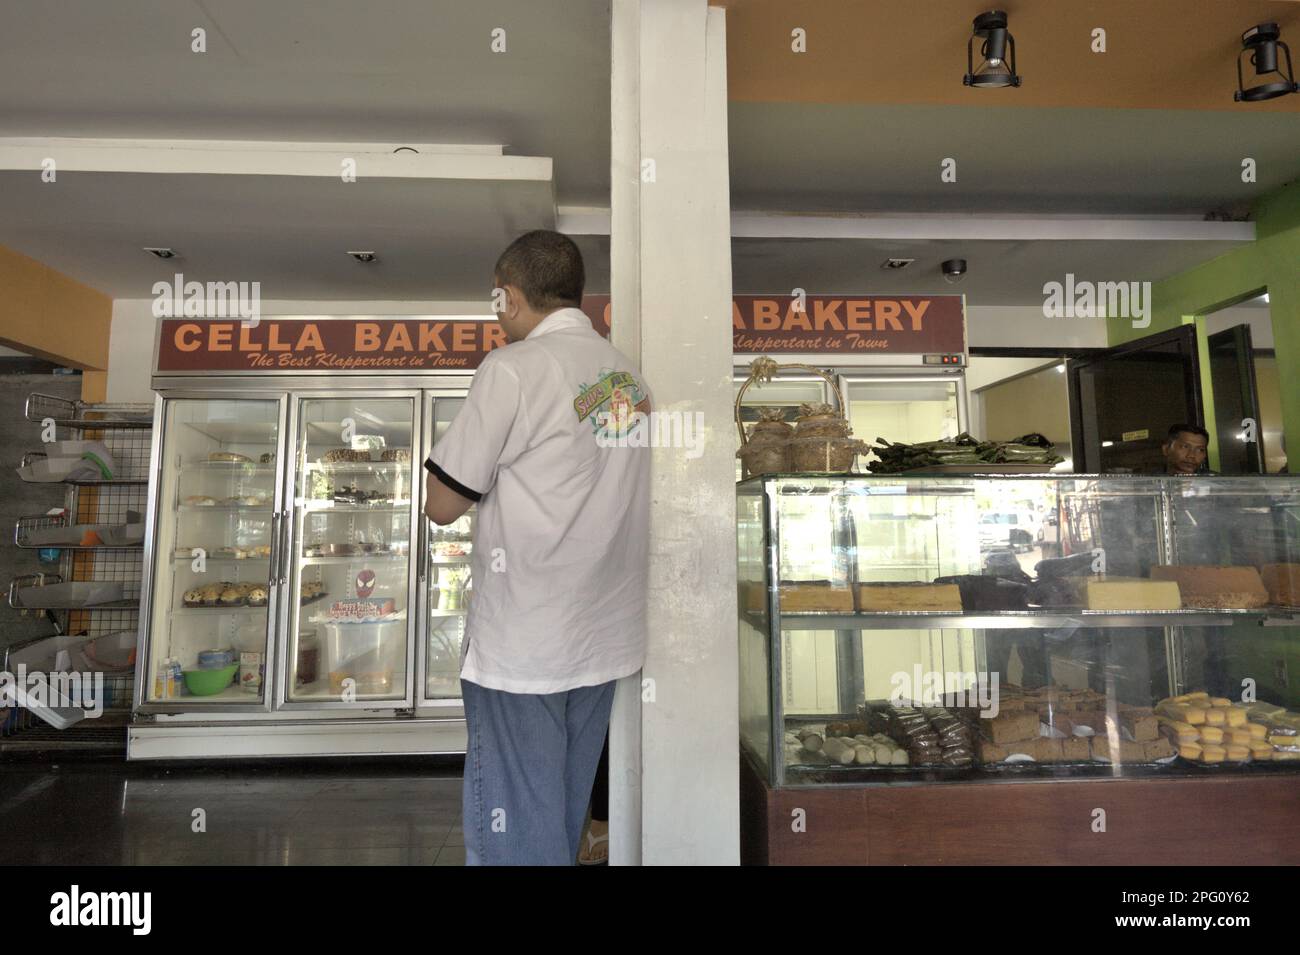 Cella Cake & Bakery, a well-known shop located on Tikala Ares Street, Manado, North Sulawesi, Indonesia. Stock Photo